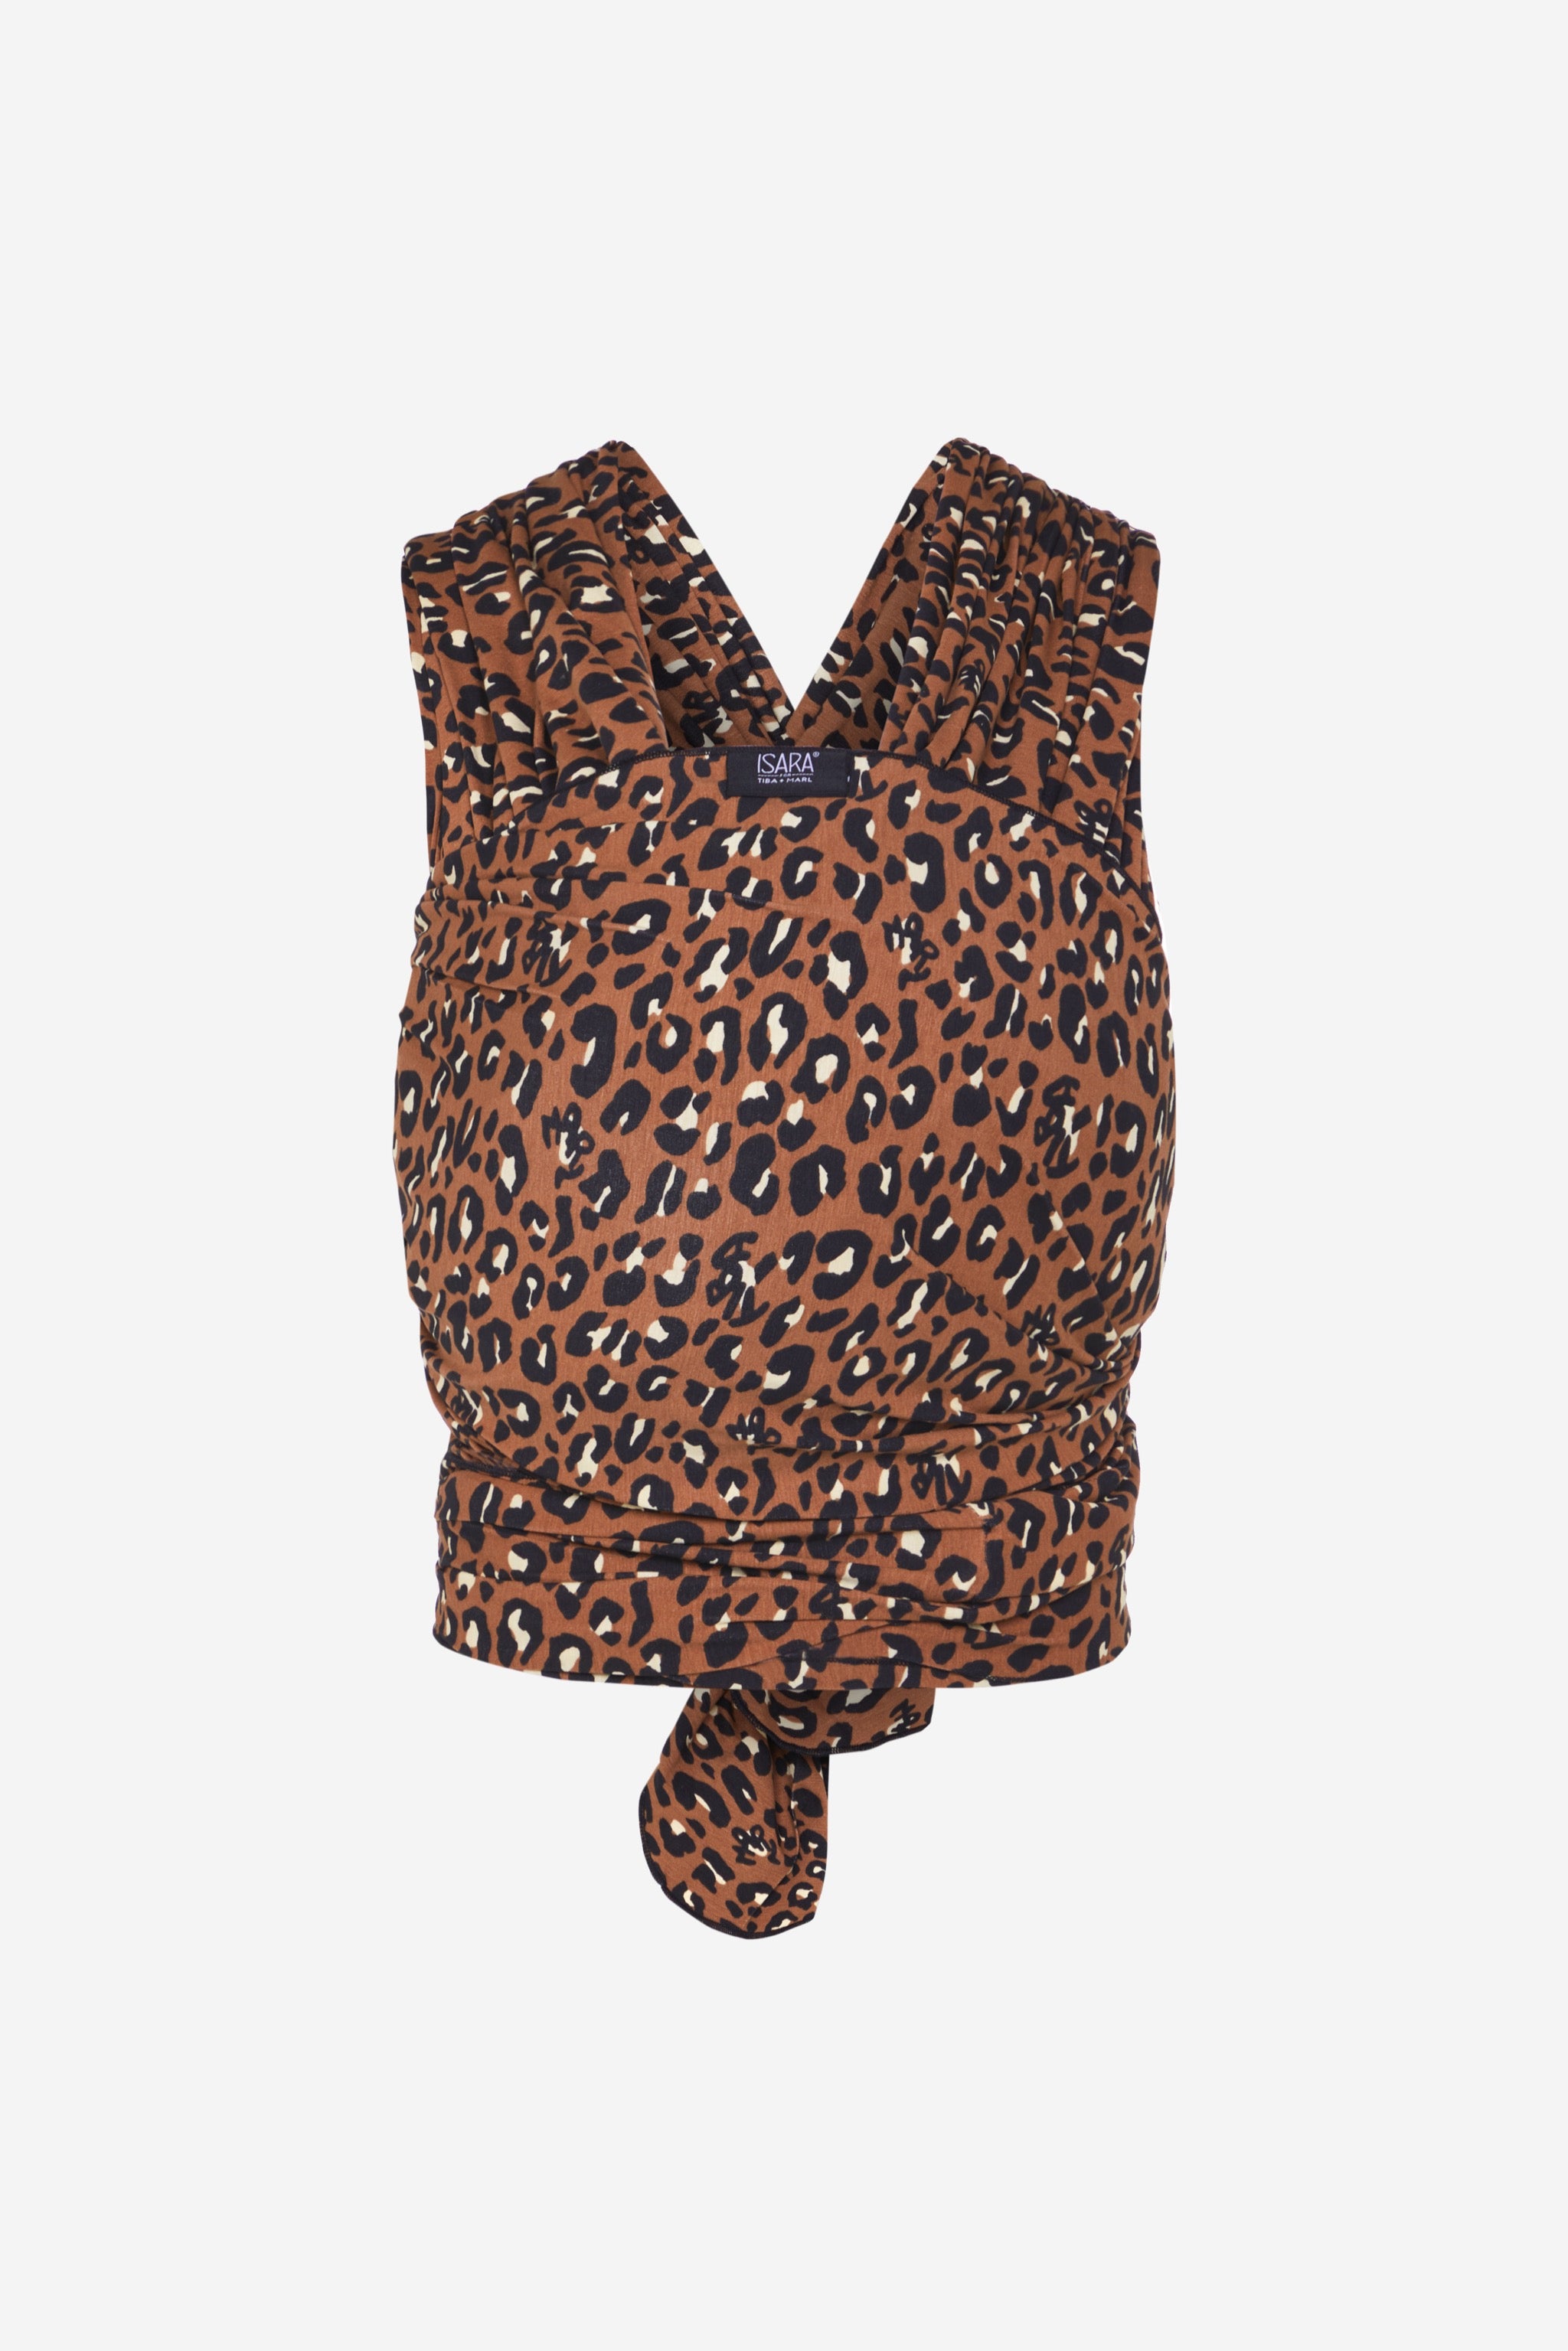 Isara for T+M Organic Stretchy Wrap Rust Leopard Print